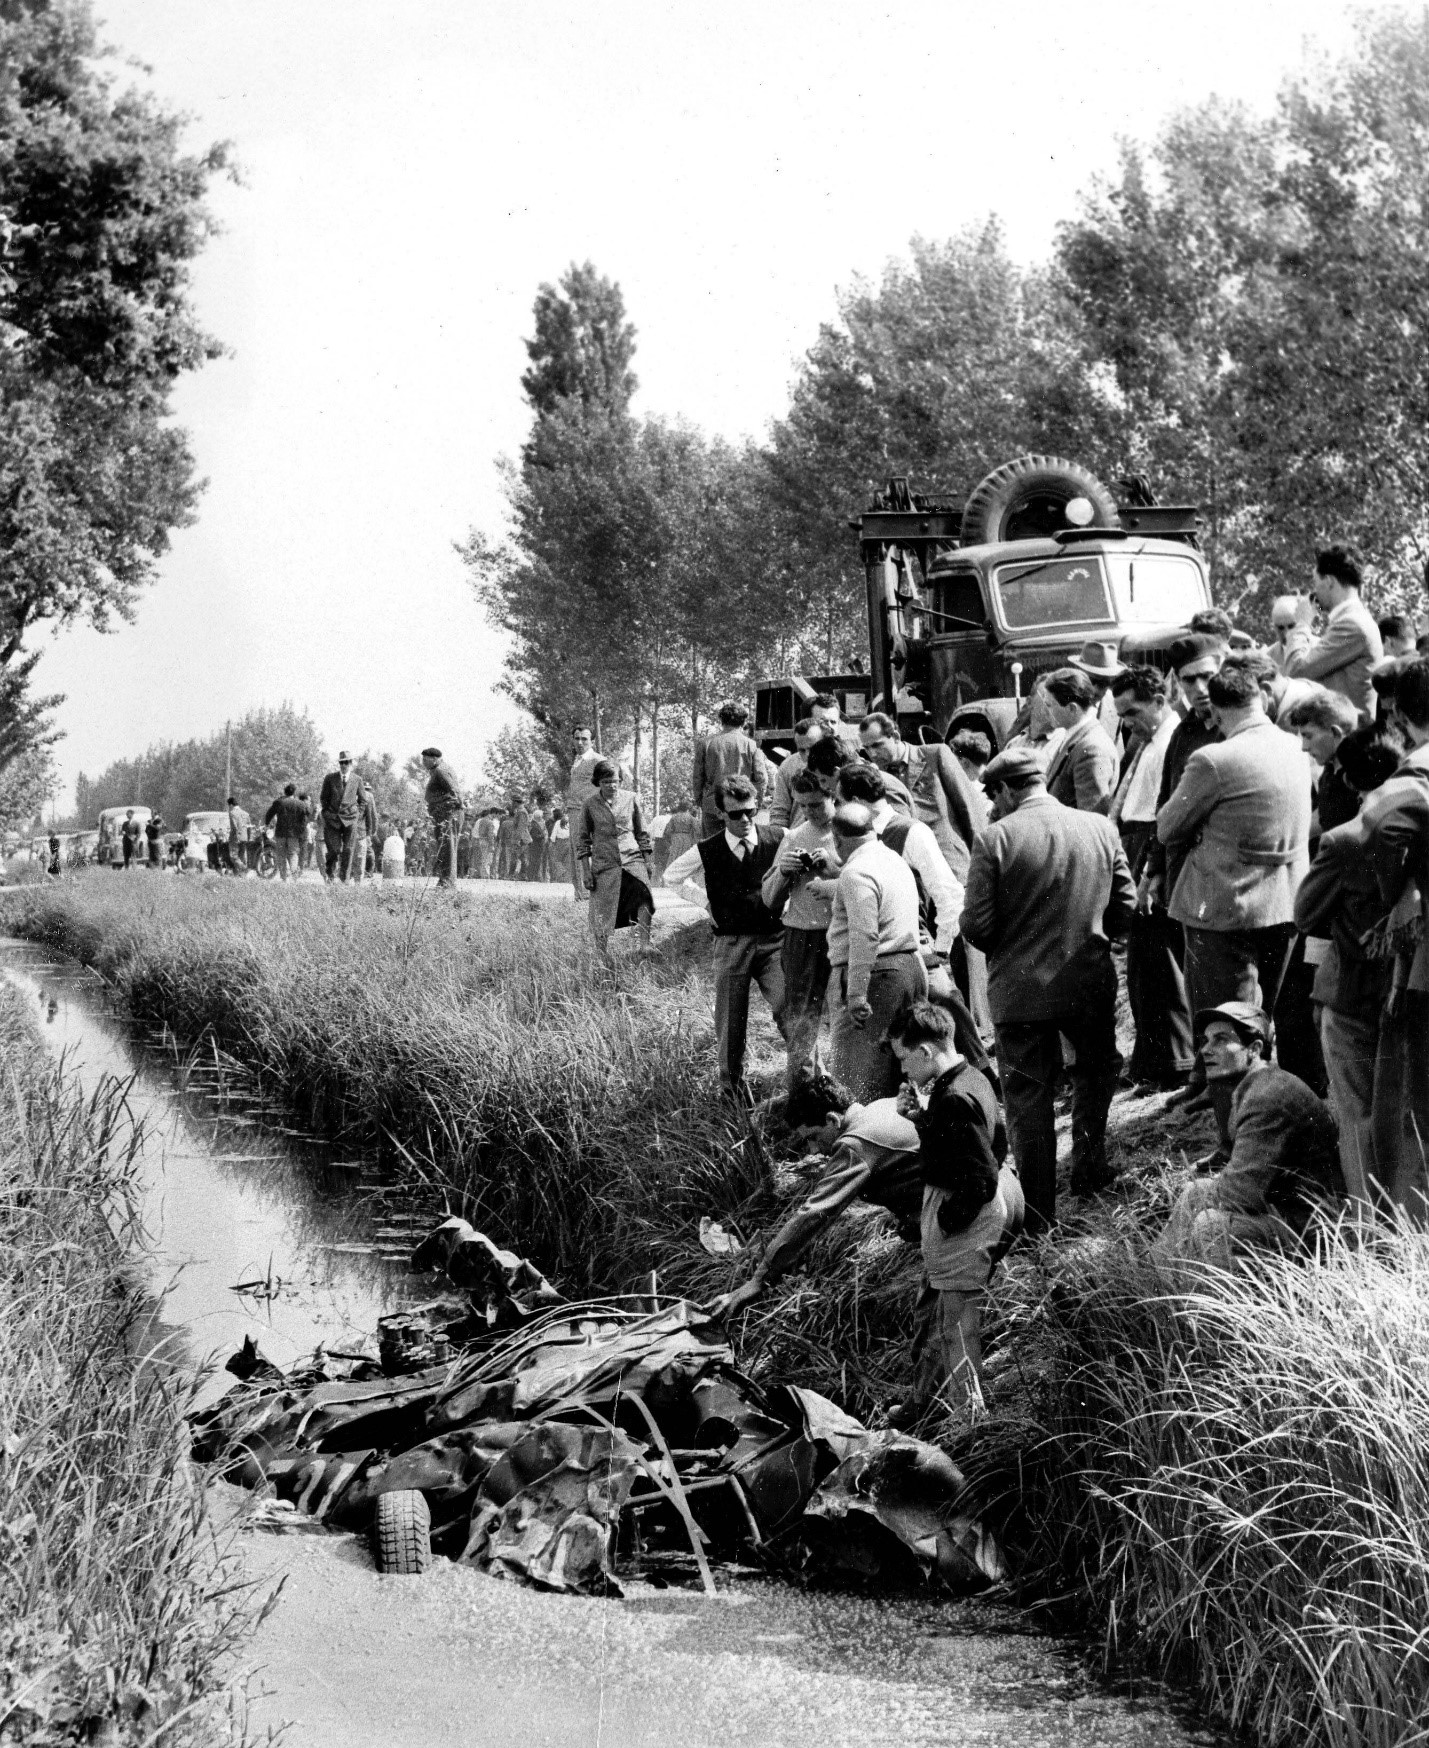 Alfonso de Portago's Ferrari 335 remains in the ditch where the car ended, after killing 10.